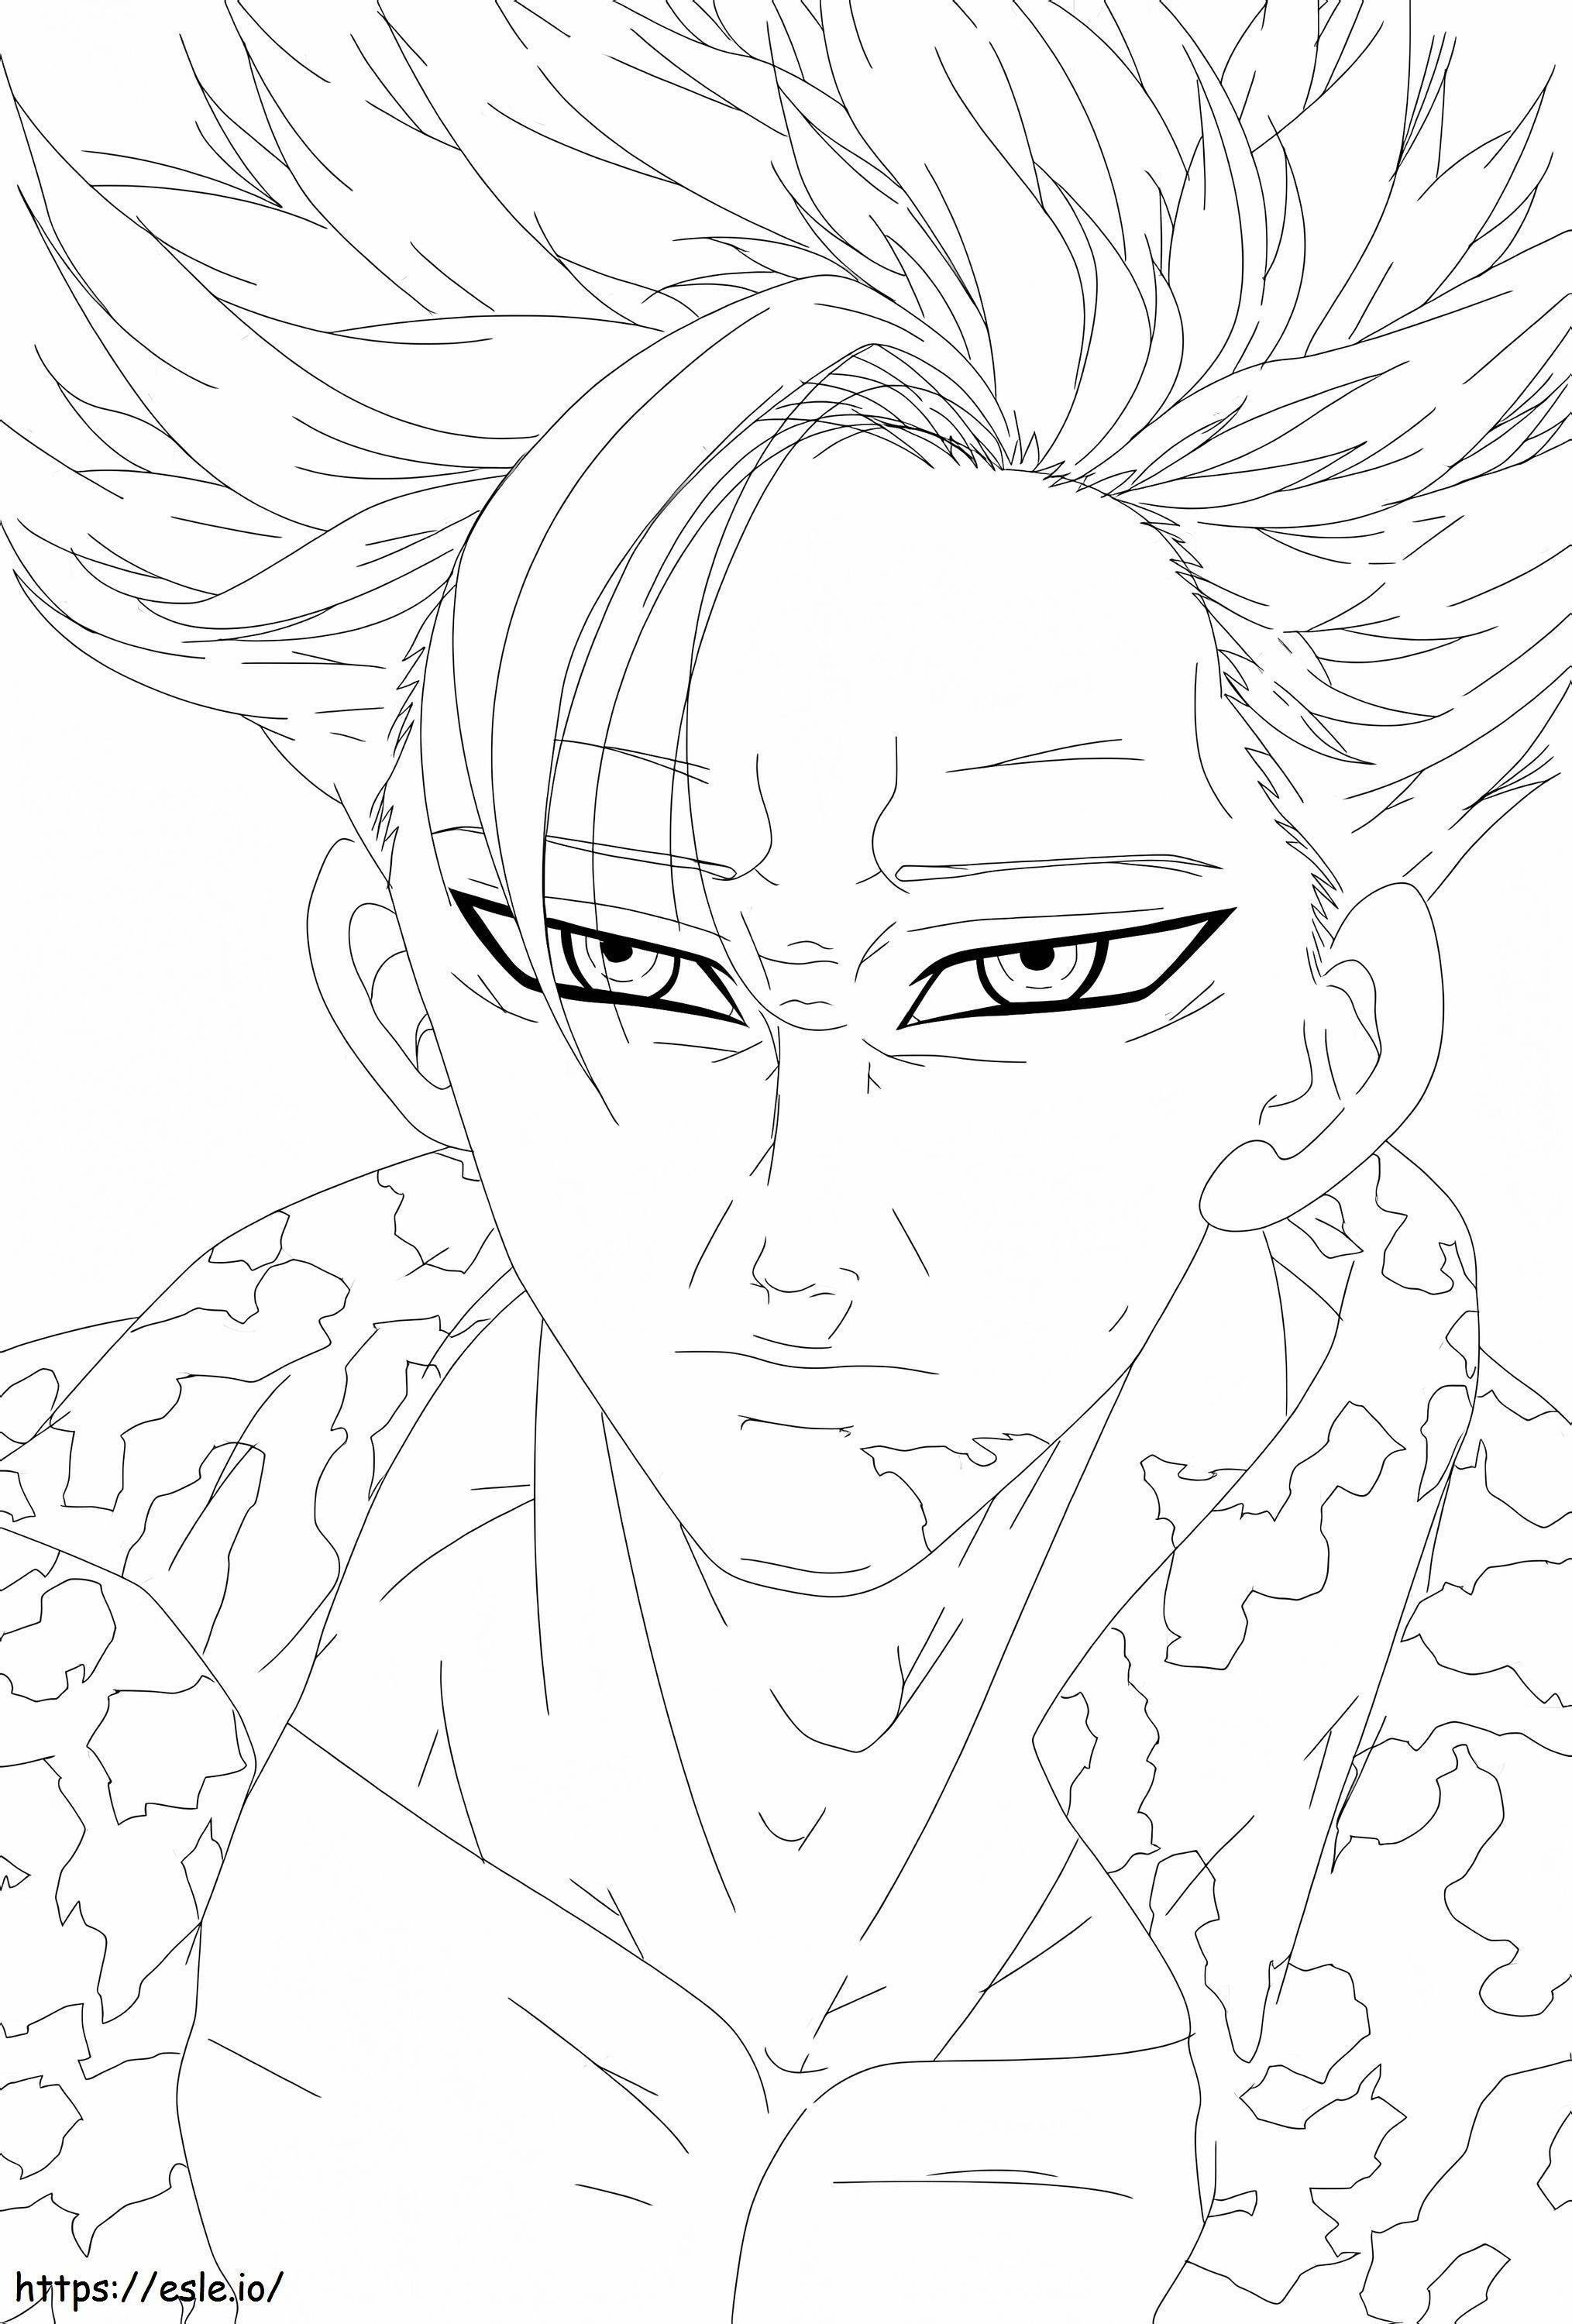 Anrgy Ban coloring page